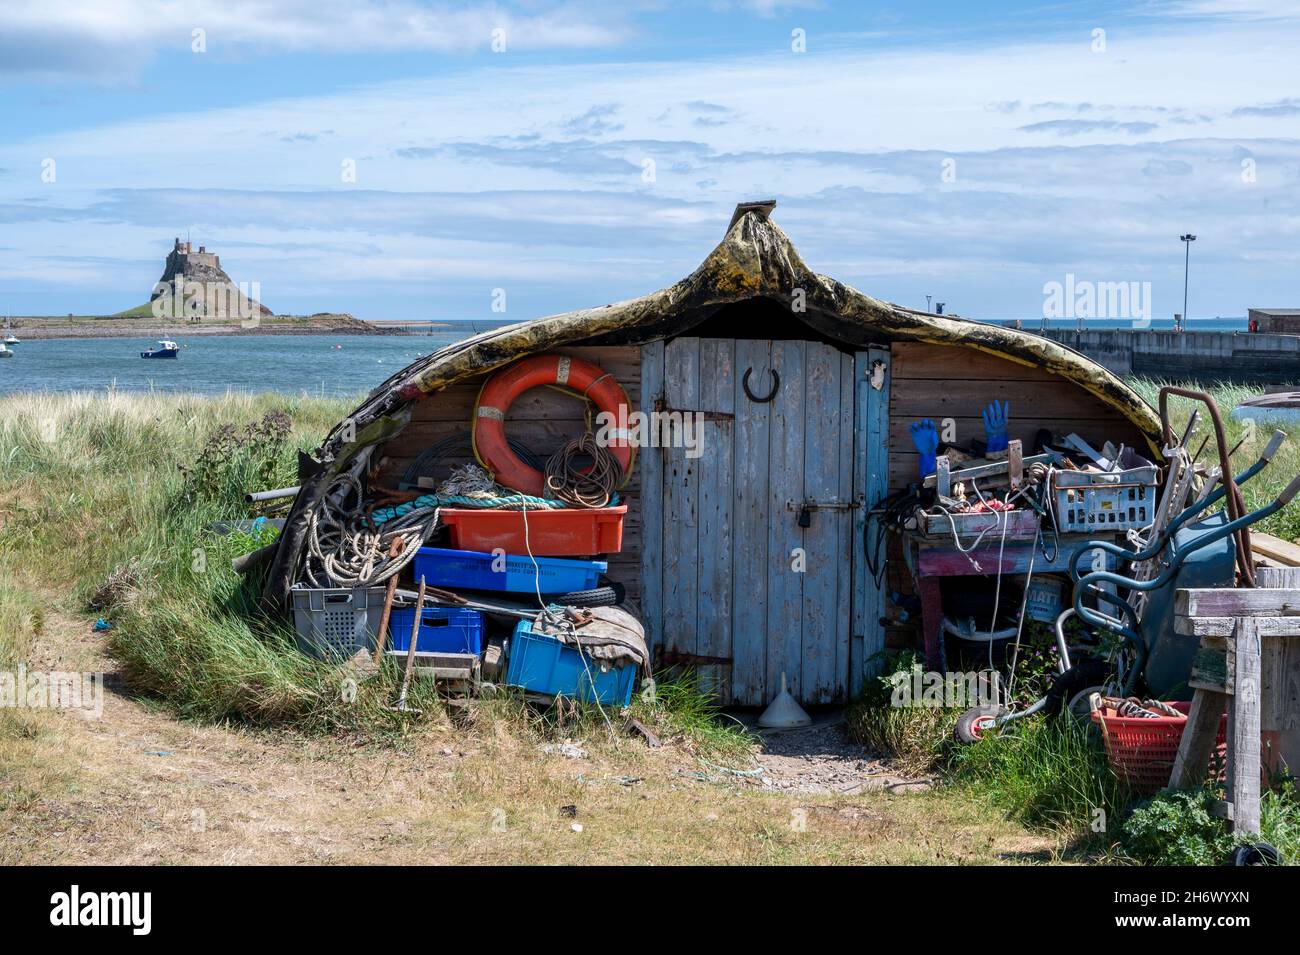 Attractive 'boat sheds' made from repurposed upturned wooden herring boats, Lindisfarne Harbour, Holy Island. Lindisfarne Castle is in the background. Stock Photo